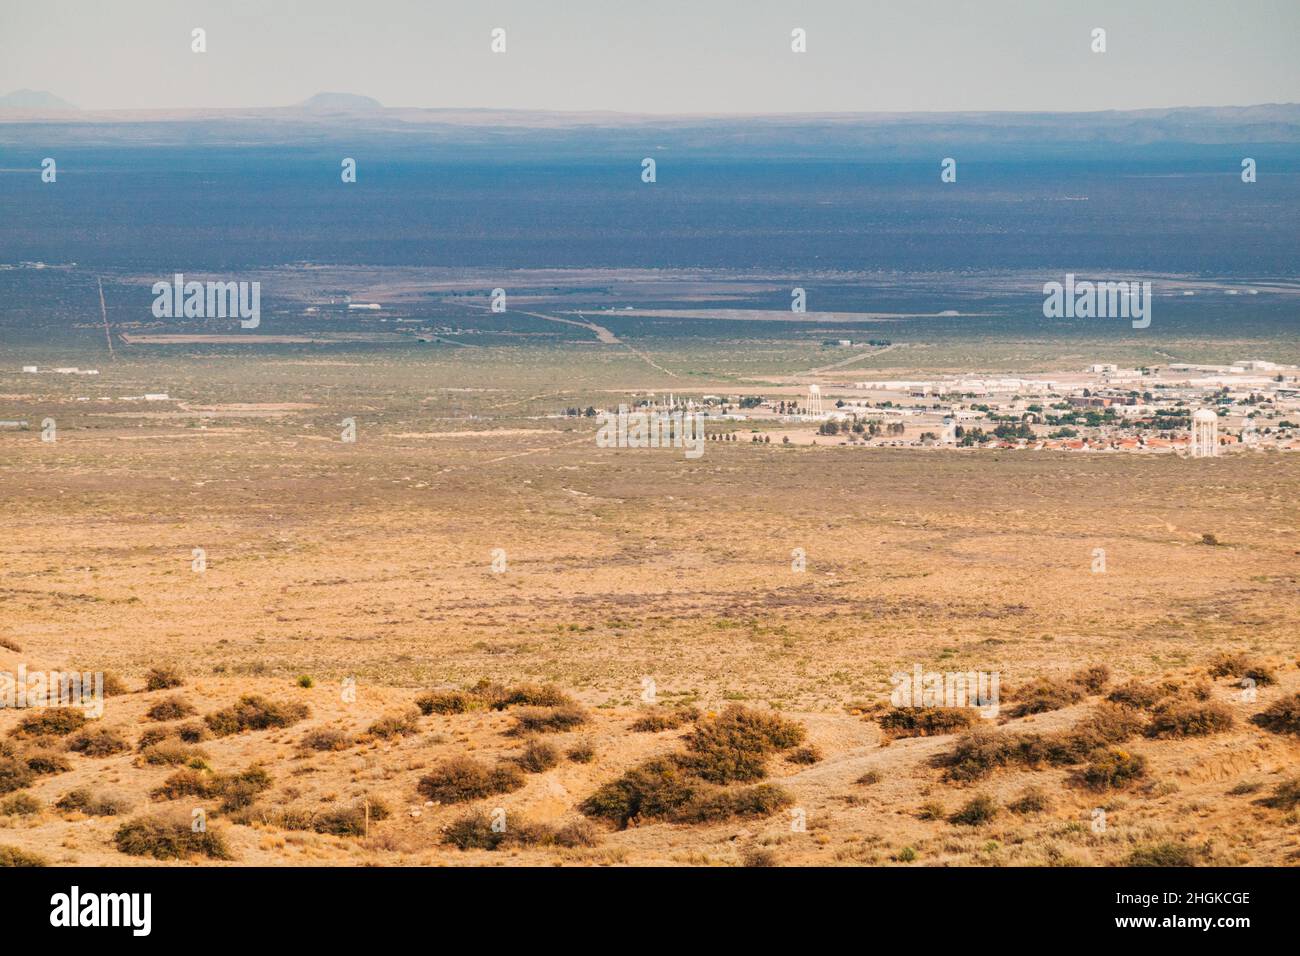 the township of the White Sands Missile Range, a U.S. Army testing site, in New Mexico, United States, as seen from the highway Stock Photo